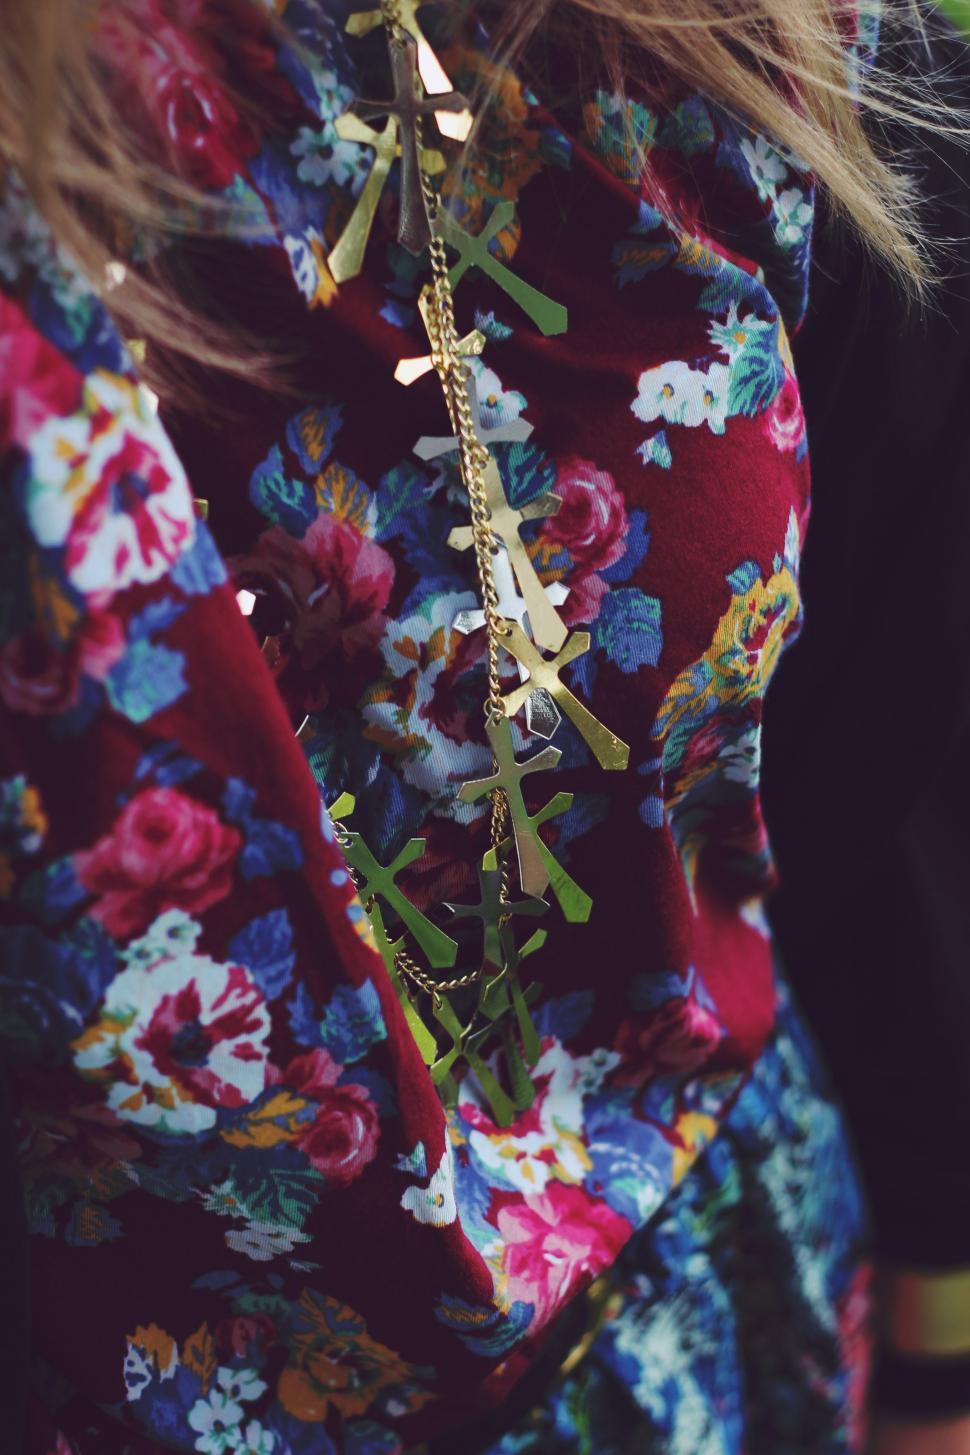 Free Image of Close Up of Person Wearing Floral Shirt 